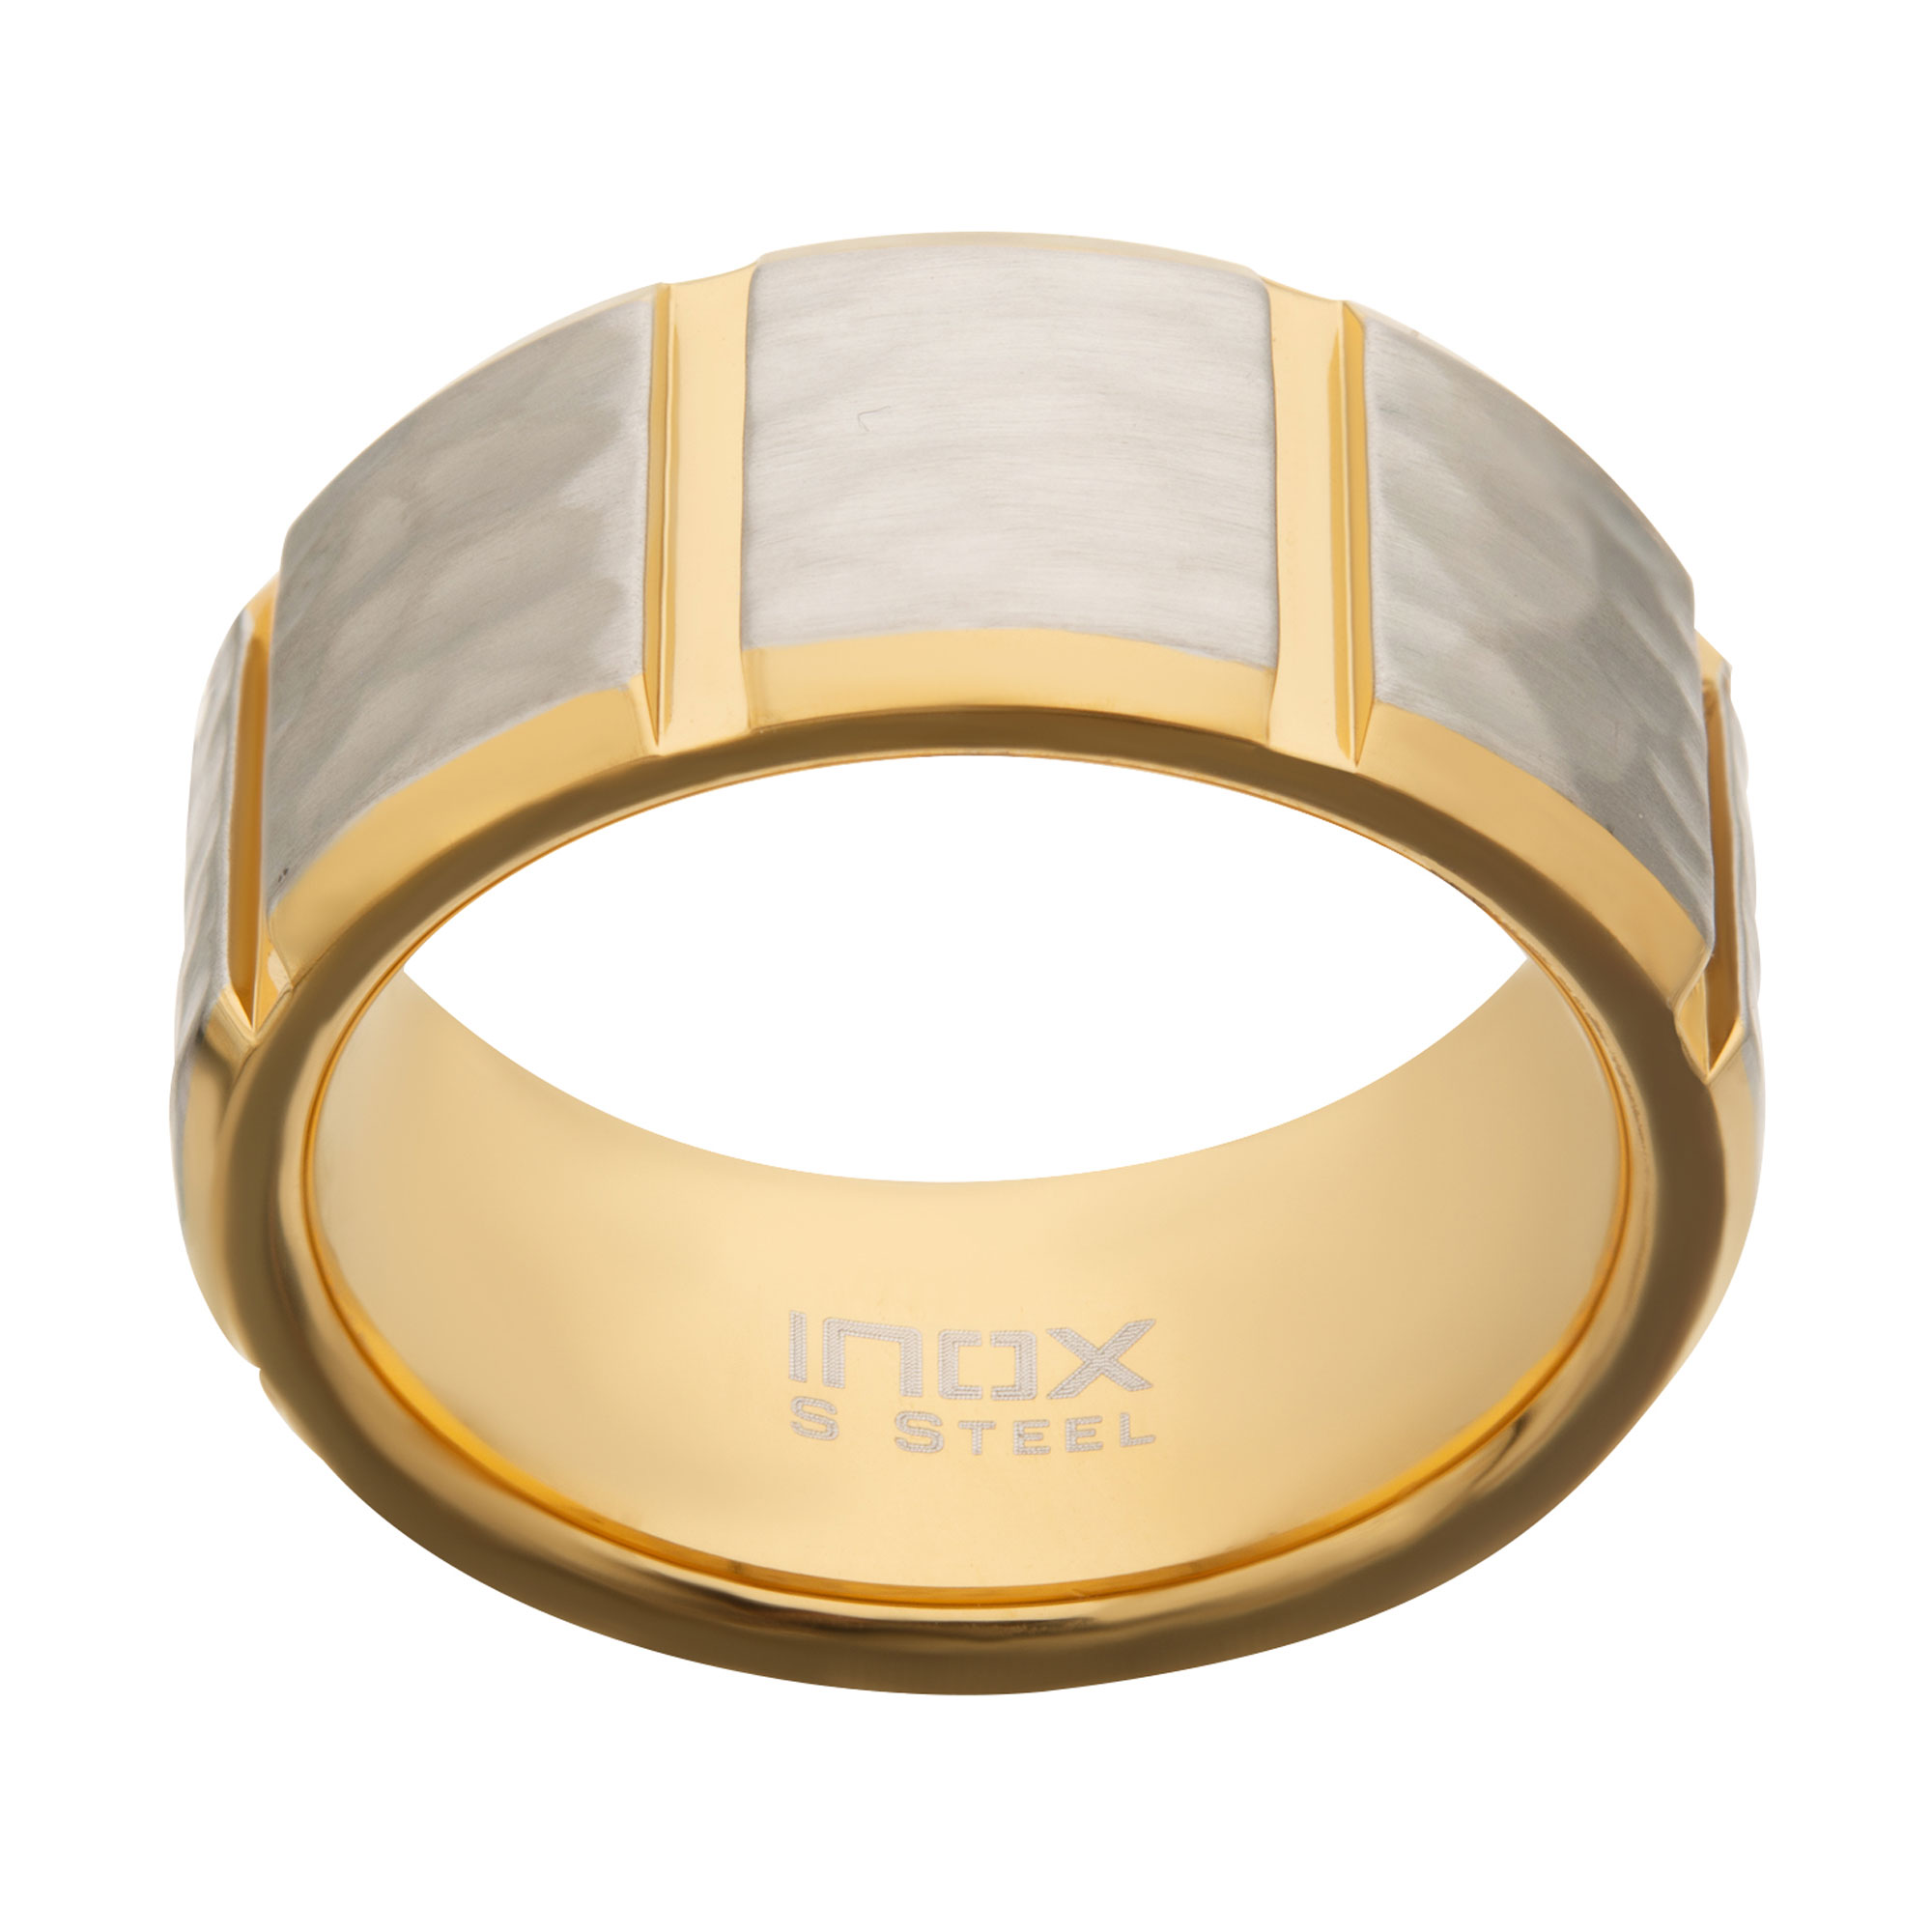 Gold Plated and Stainless Steel Hammered Finish Ring Image 2 Midtown Diamonds Reno, NV